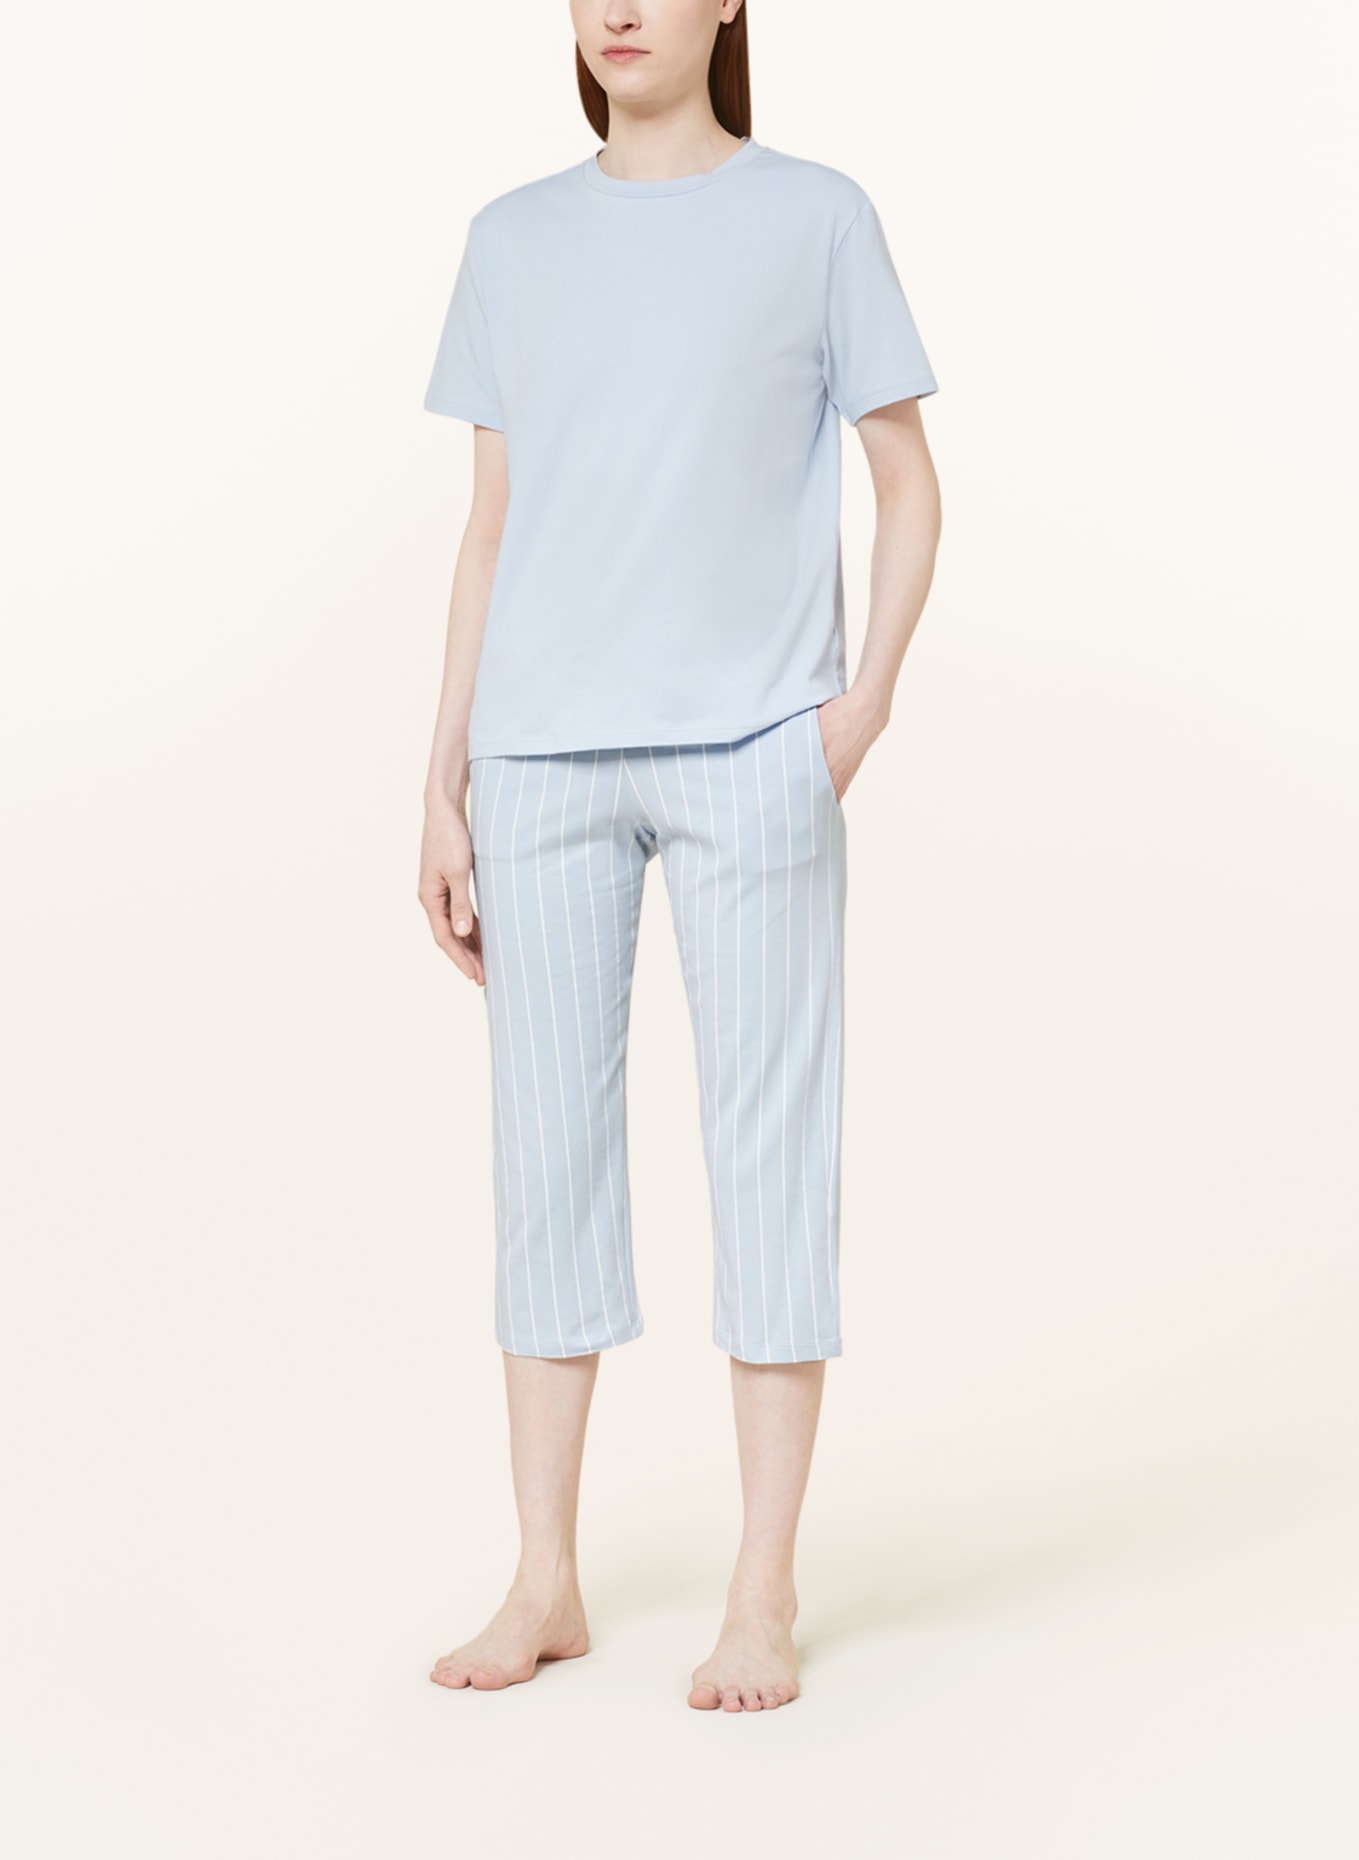 SCHIESSER 3/4 pajama pants MIX+RELAX, Color: LIGHT BLUE/ WHITE (Image 2)